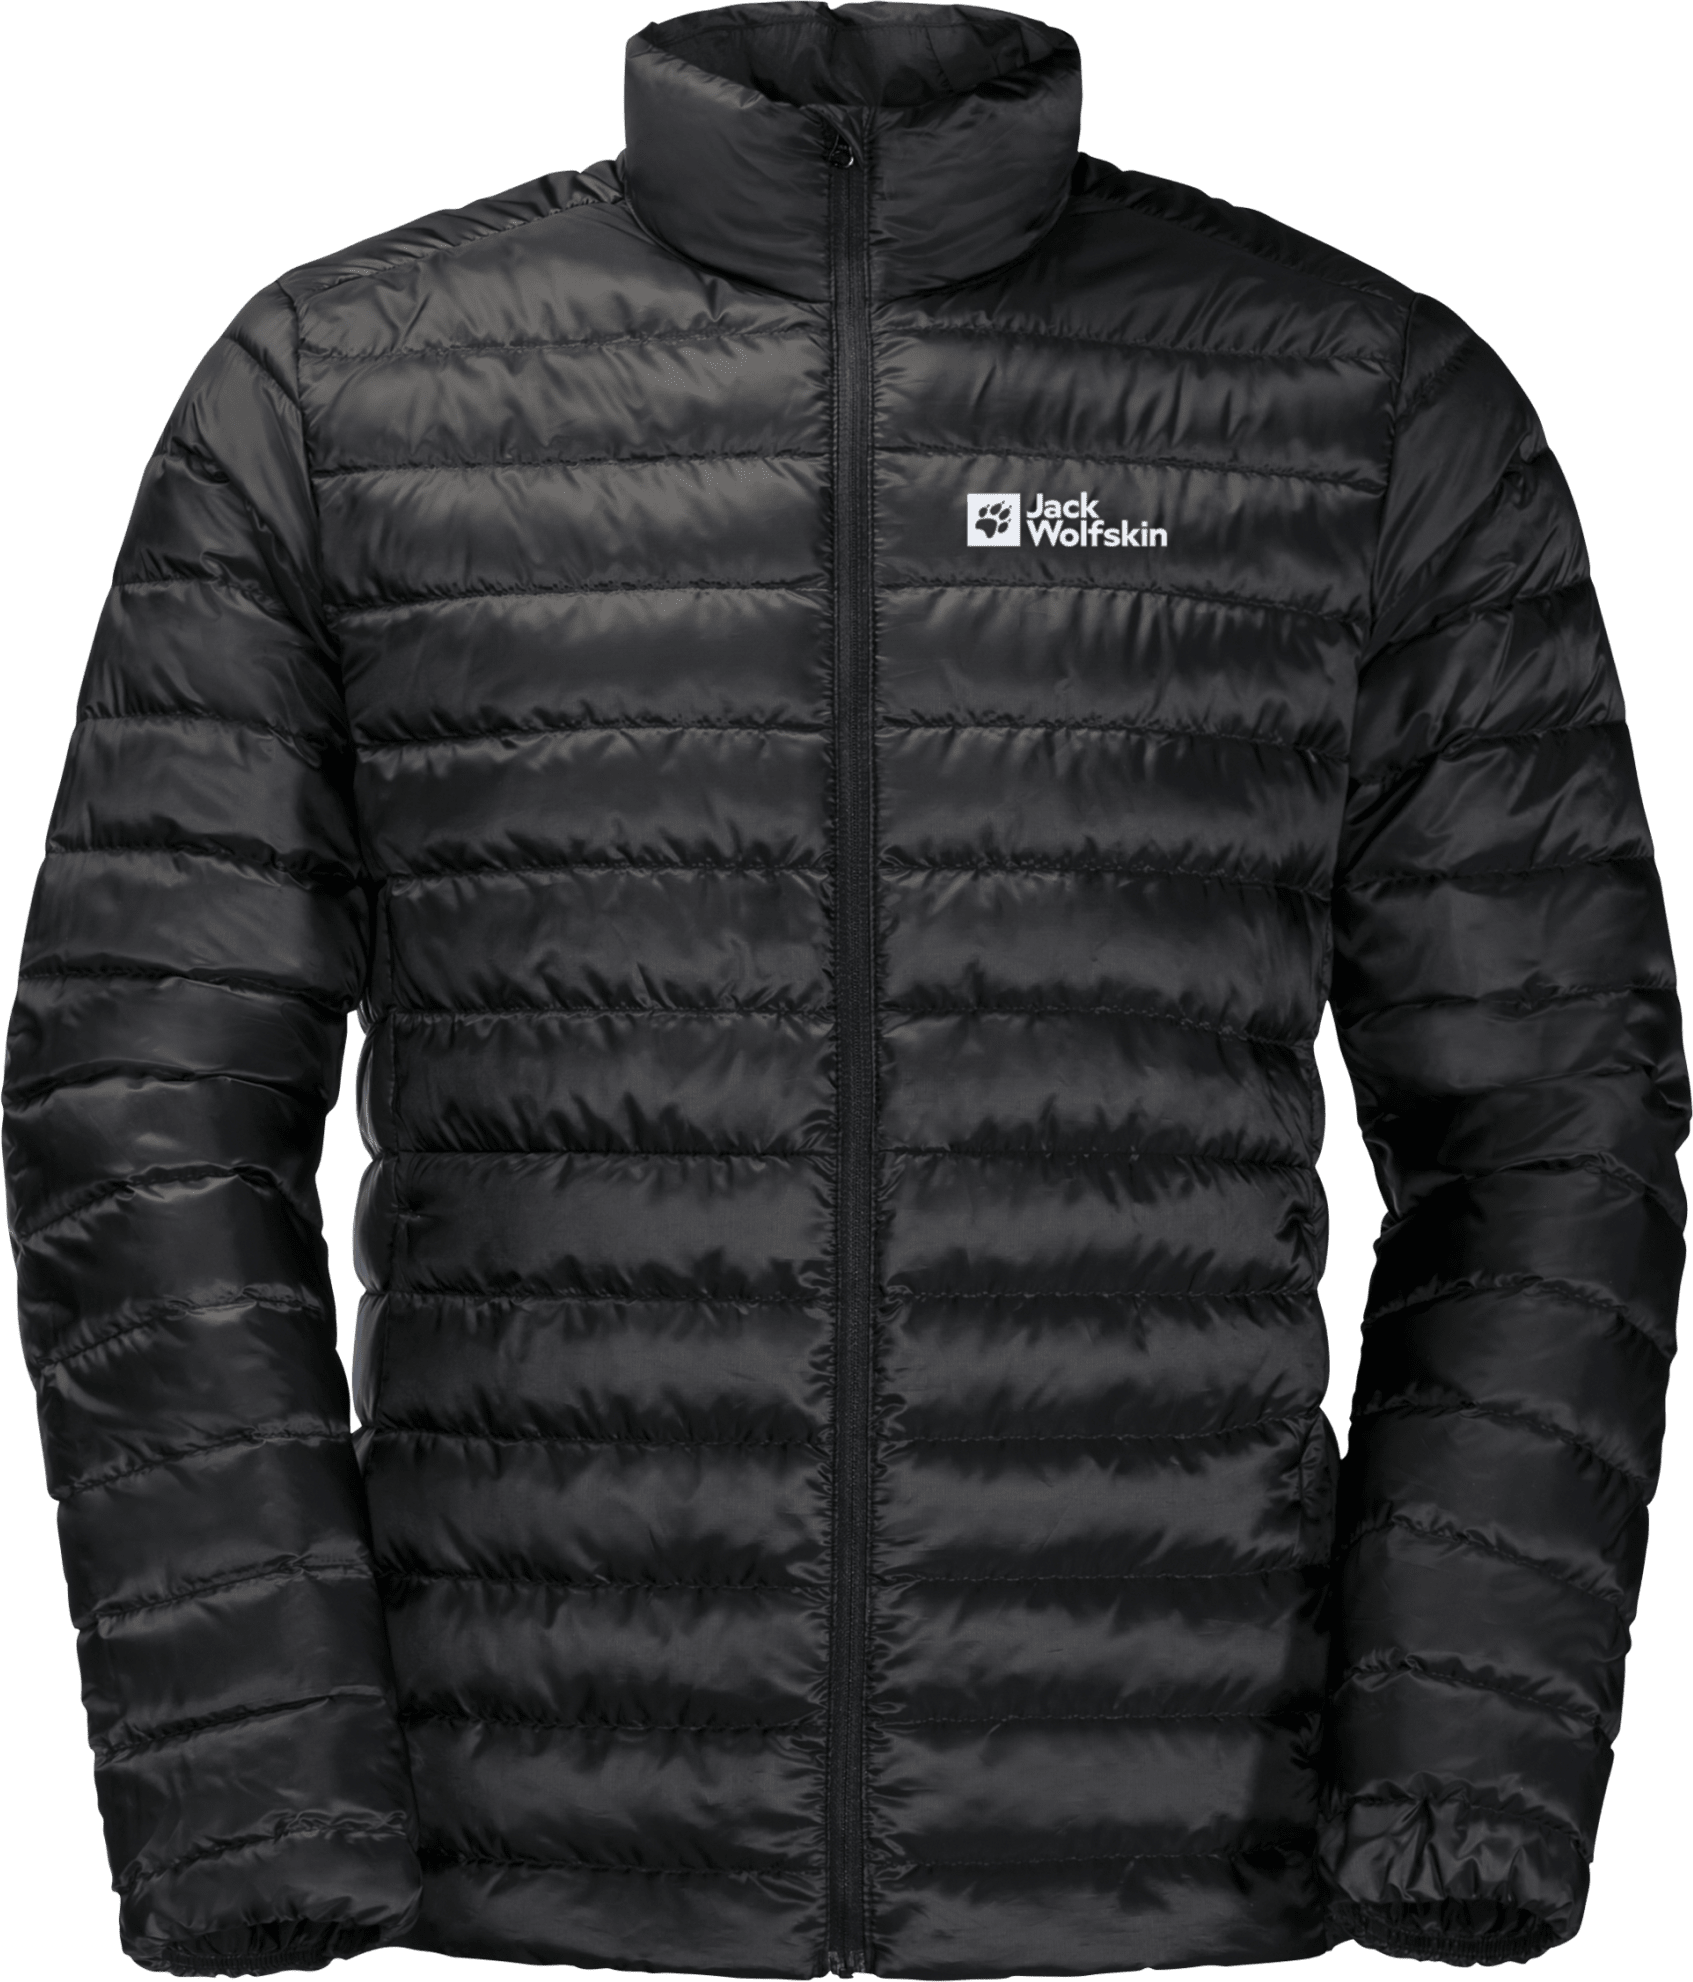 Buy Jack Wolfskin Men's Pack & Go Down Jacket from Outnorth